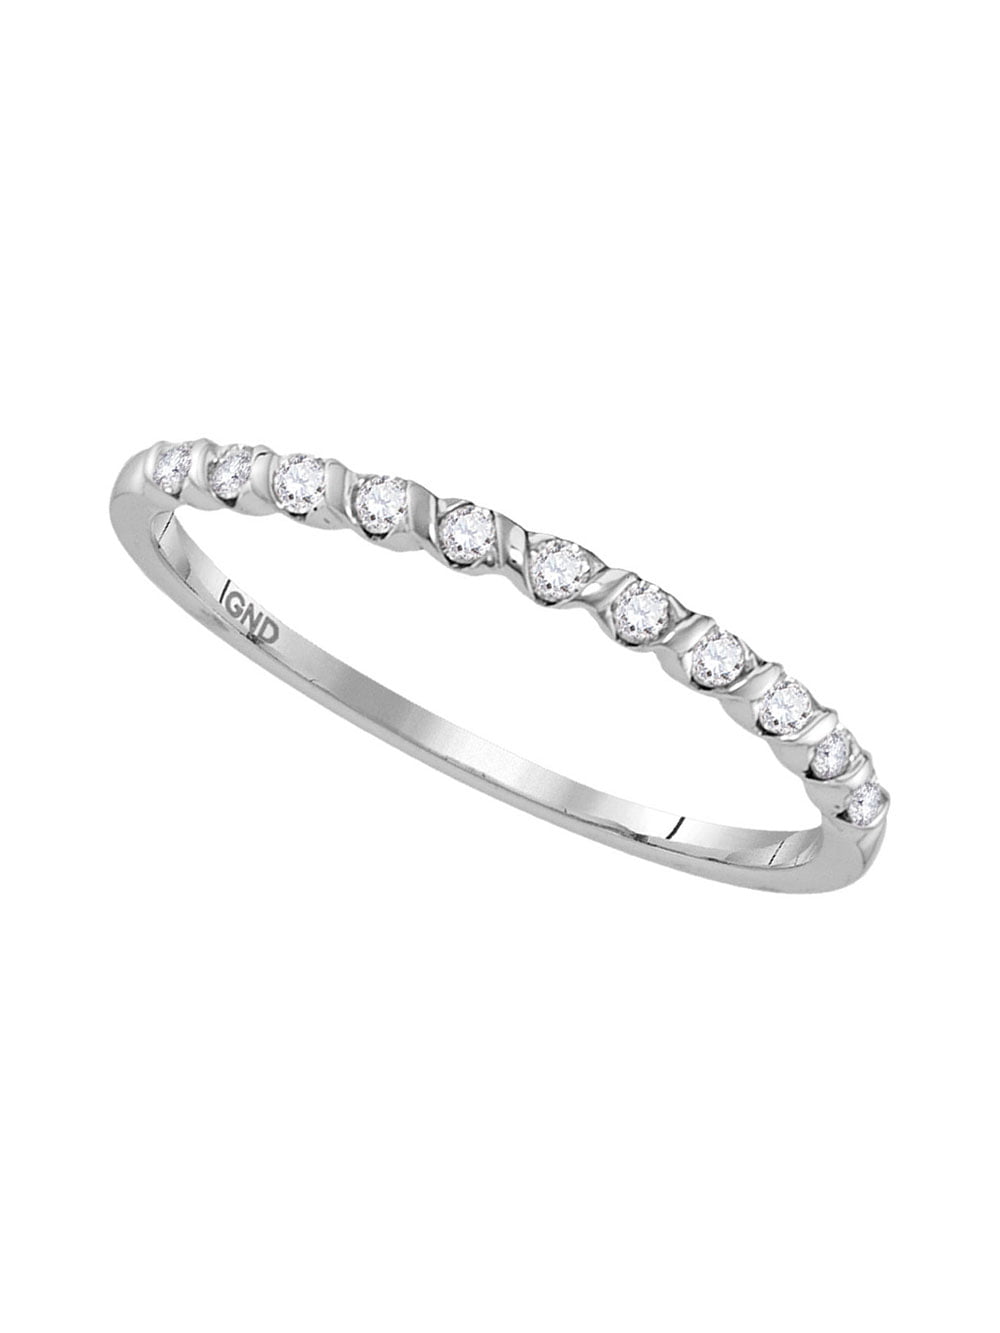 10k White Gold Womens Round Diamond Single Row Stackable Band Ring 1/6 Cttw 